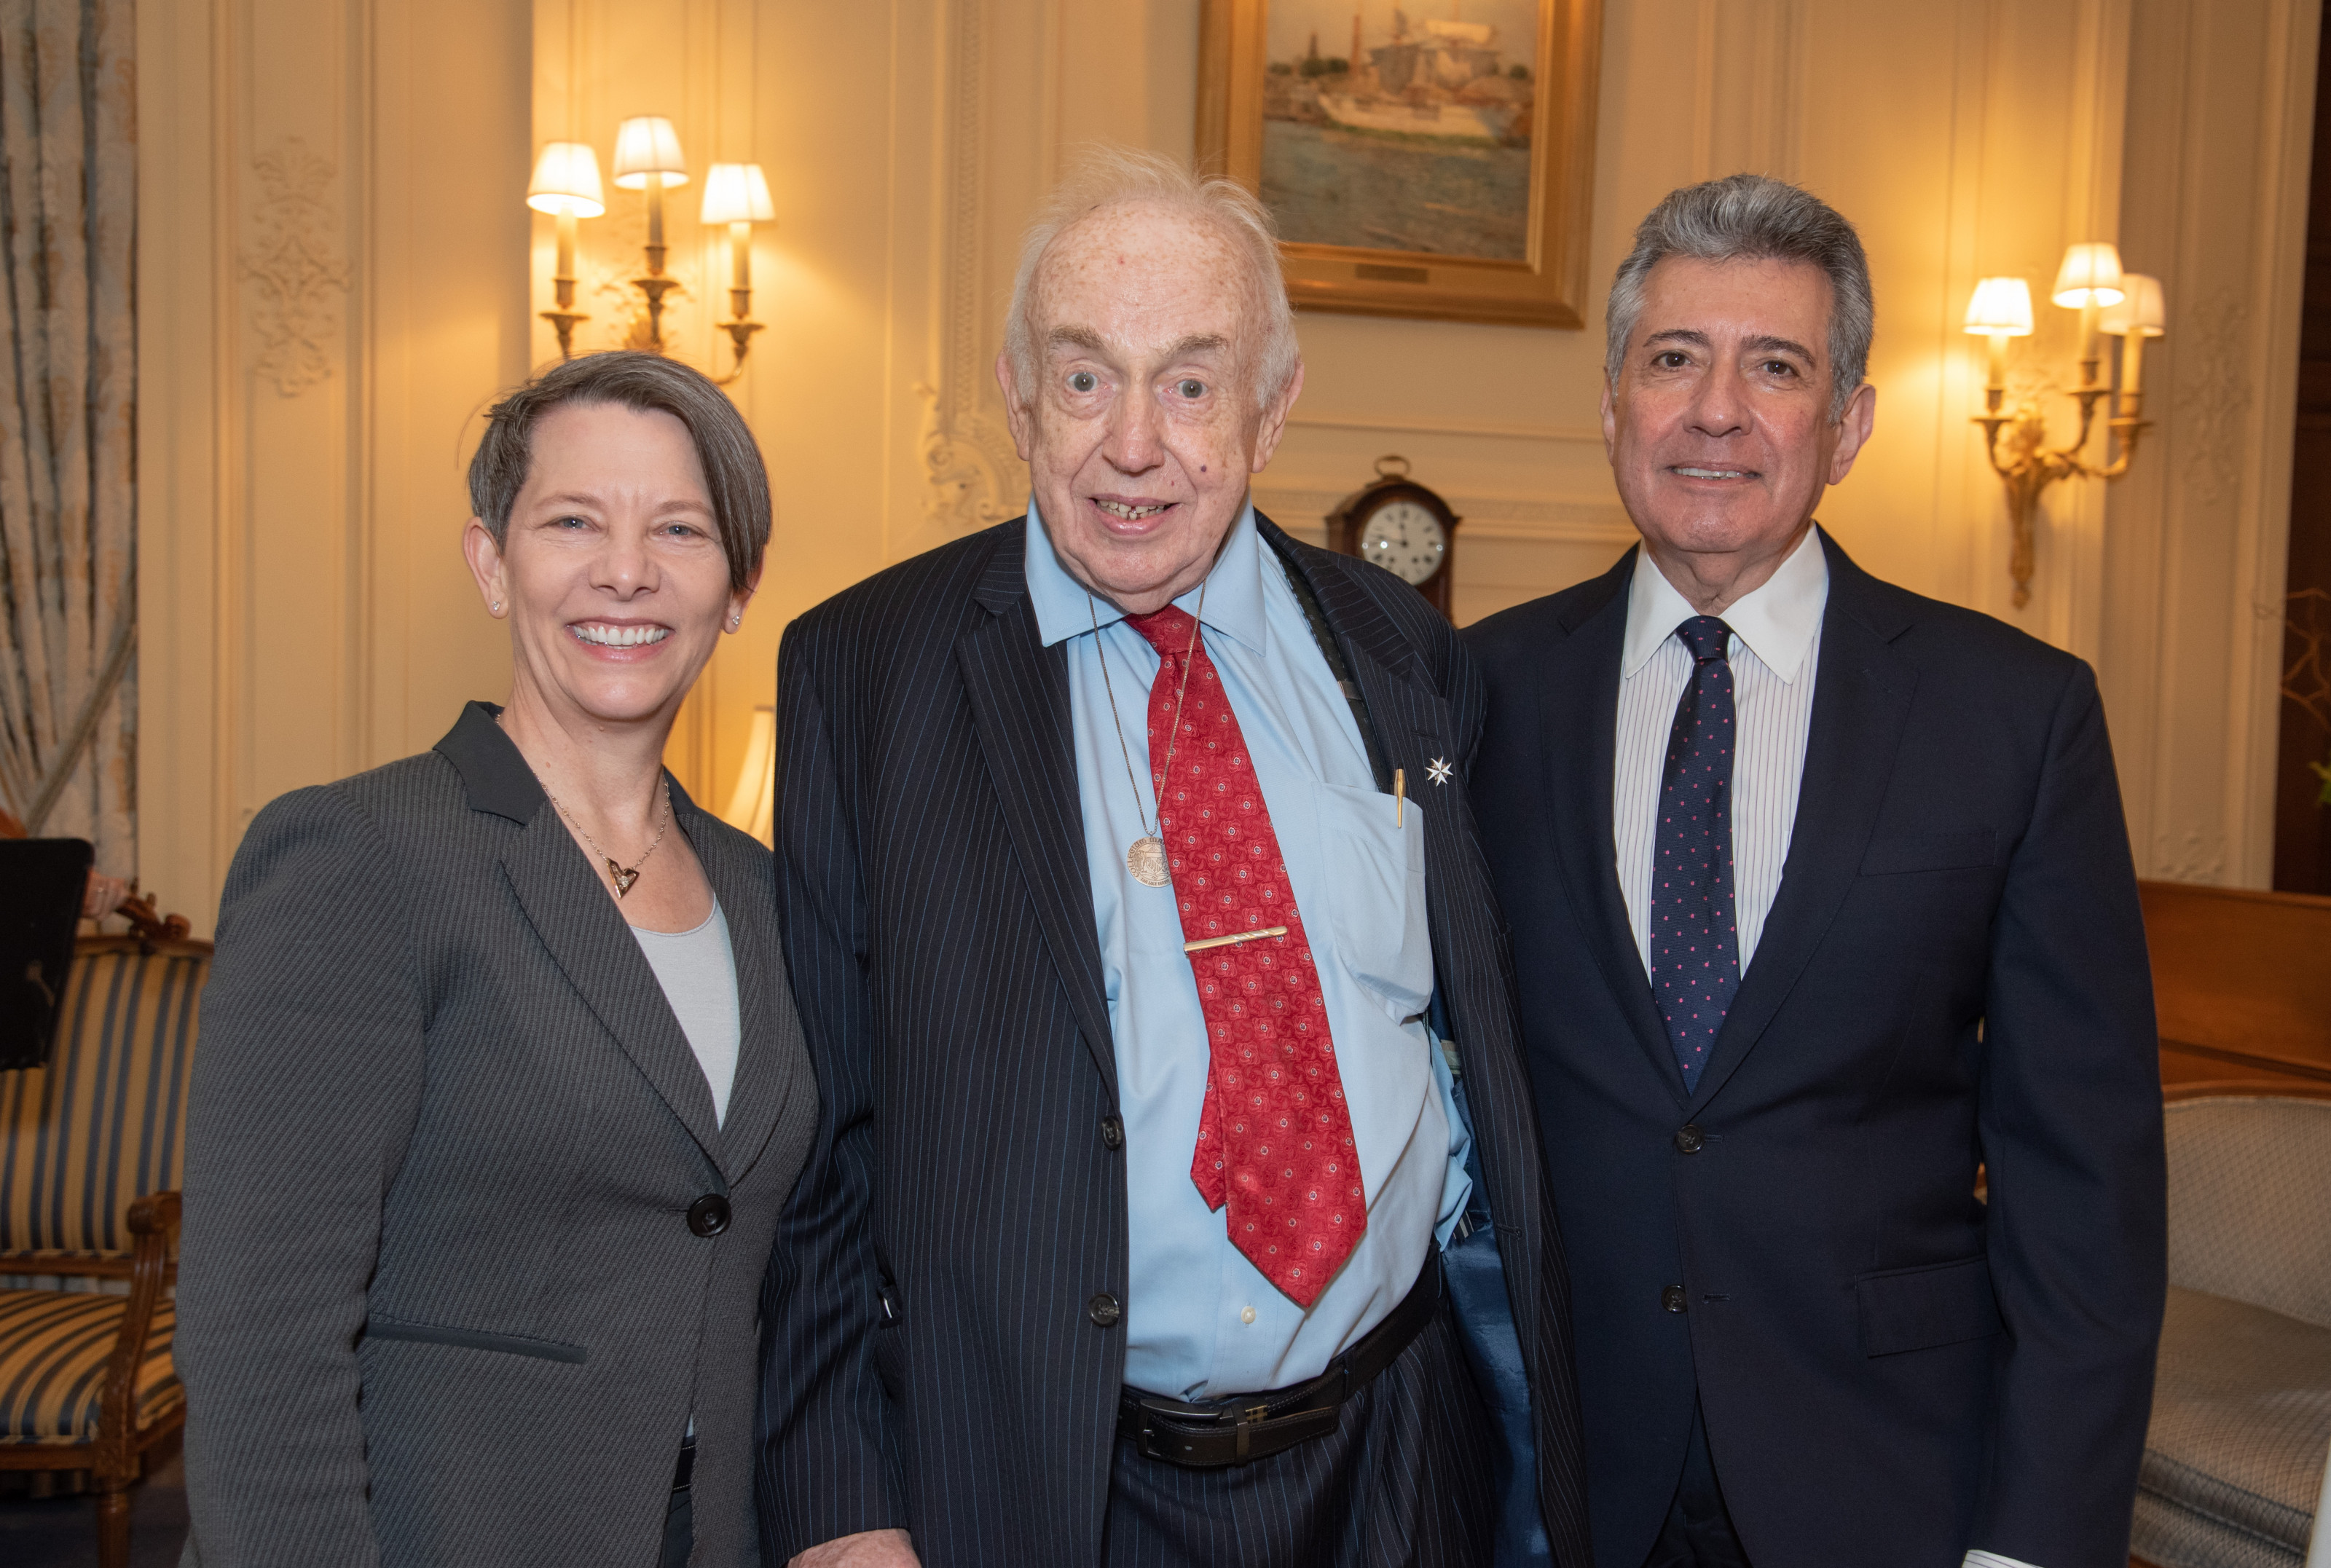 President Kerry Walk, Ph.D., Dean Emeritus Peter H. Baker, and Board Chair Mike Materasso